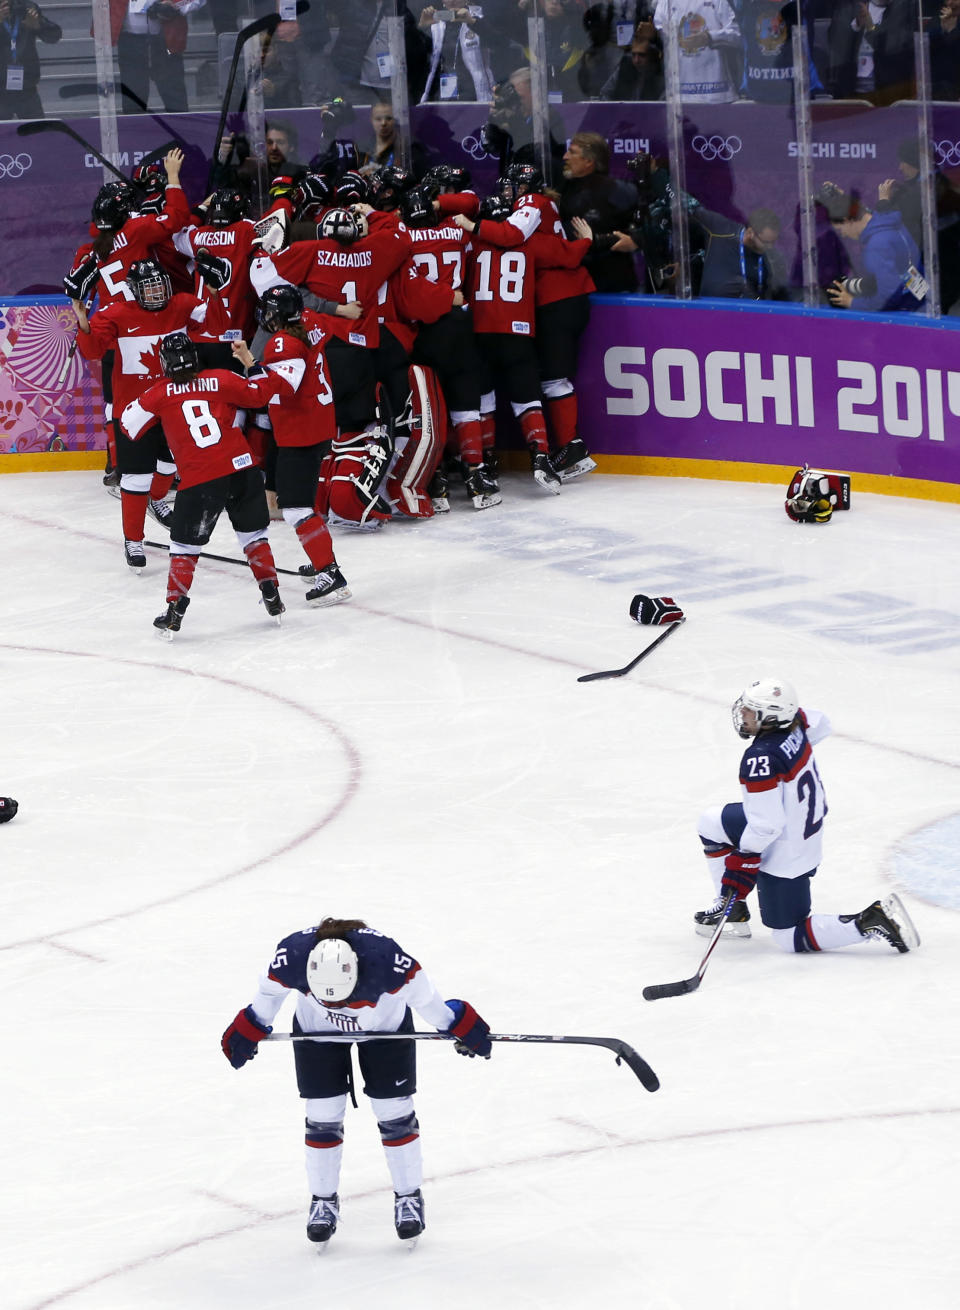 Anne Schleper of the United States (15) and Michelle Picard (23) react after the women's gold medal ice hockey game against Canada at the 2014 Winter Olympics, Thursday, Feb. 20, 2014, in Sochi, Russia. (AP Photo/Petr David Josek)